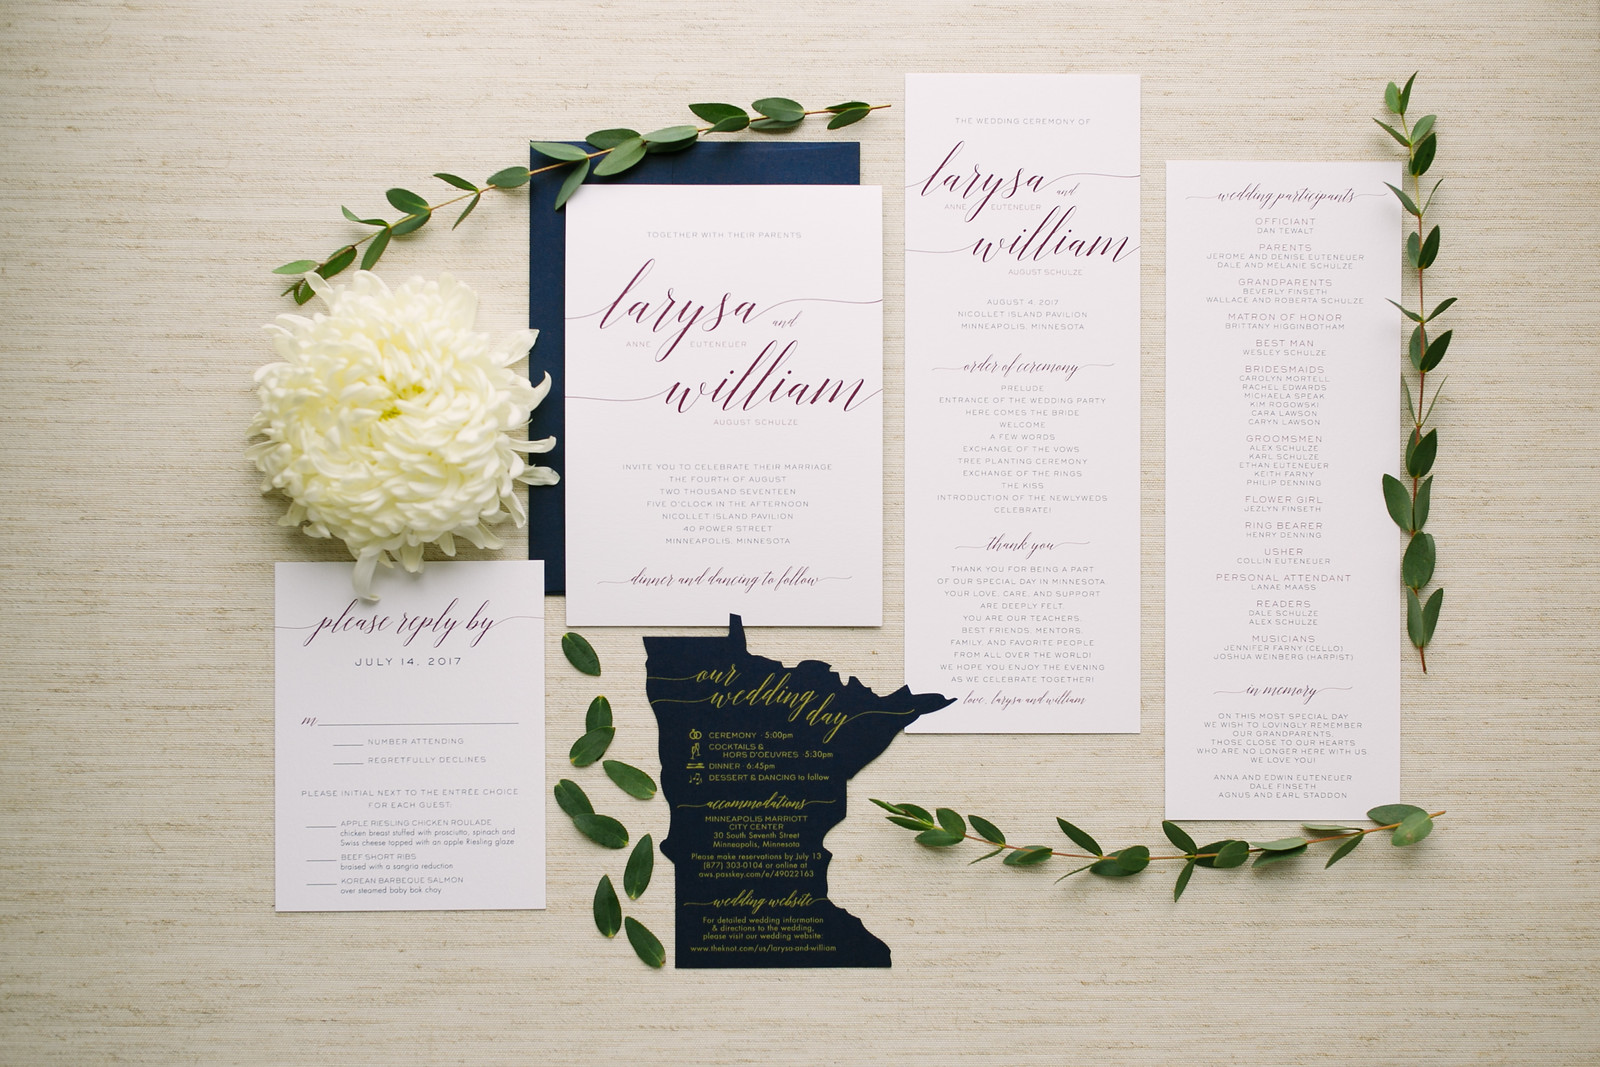 Deep Purple and Navy on an Ivory Background with a little Minnesota love